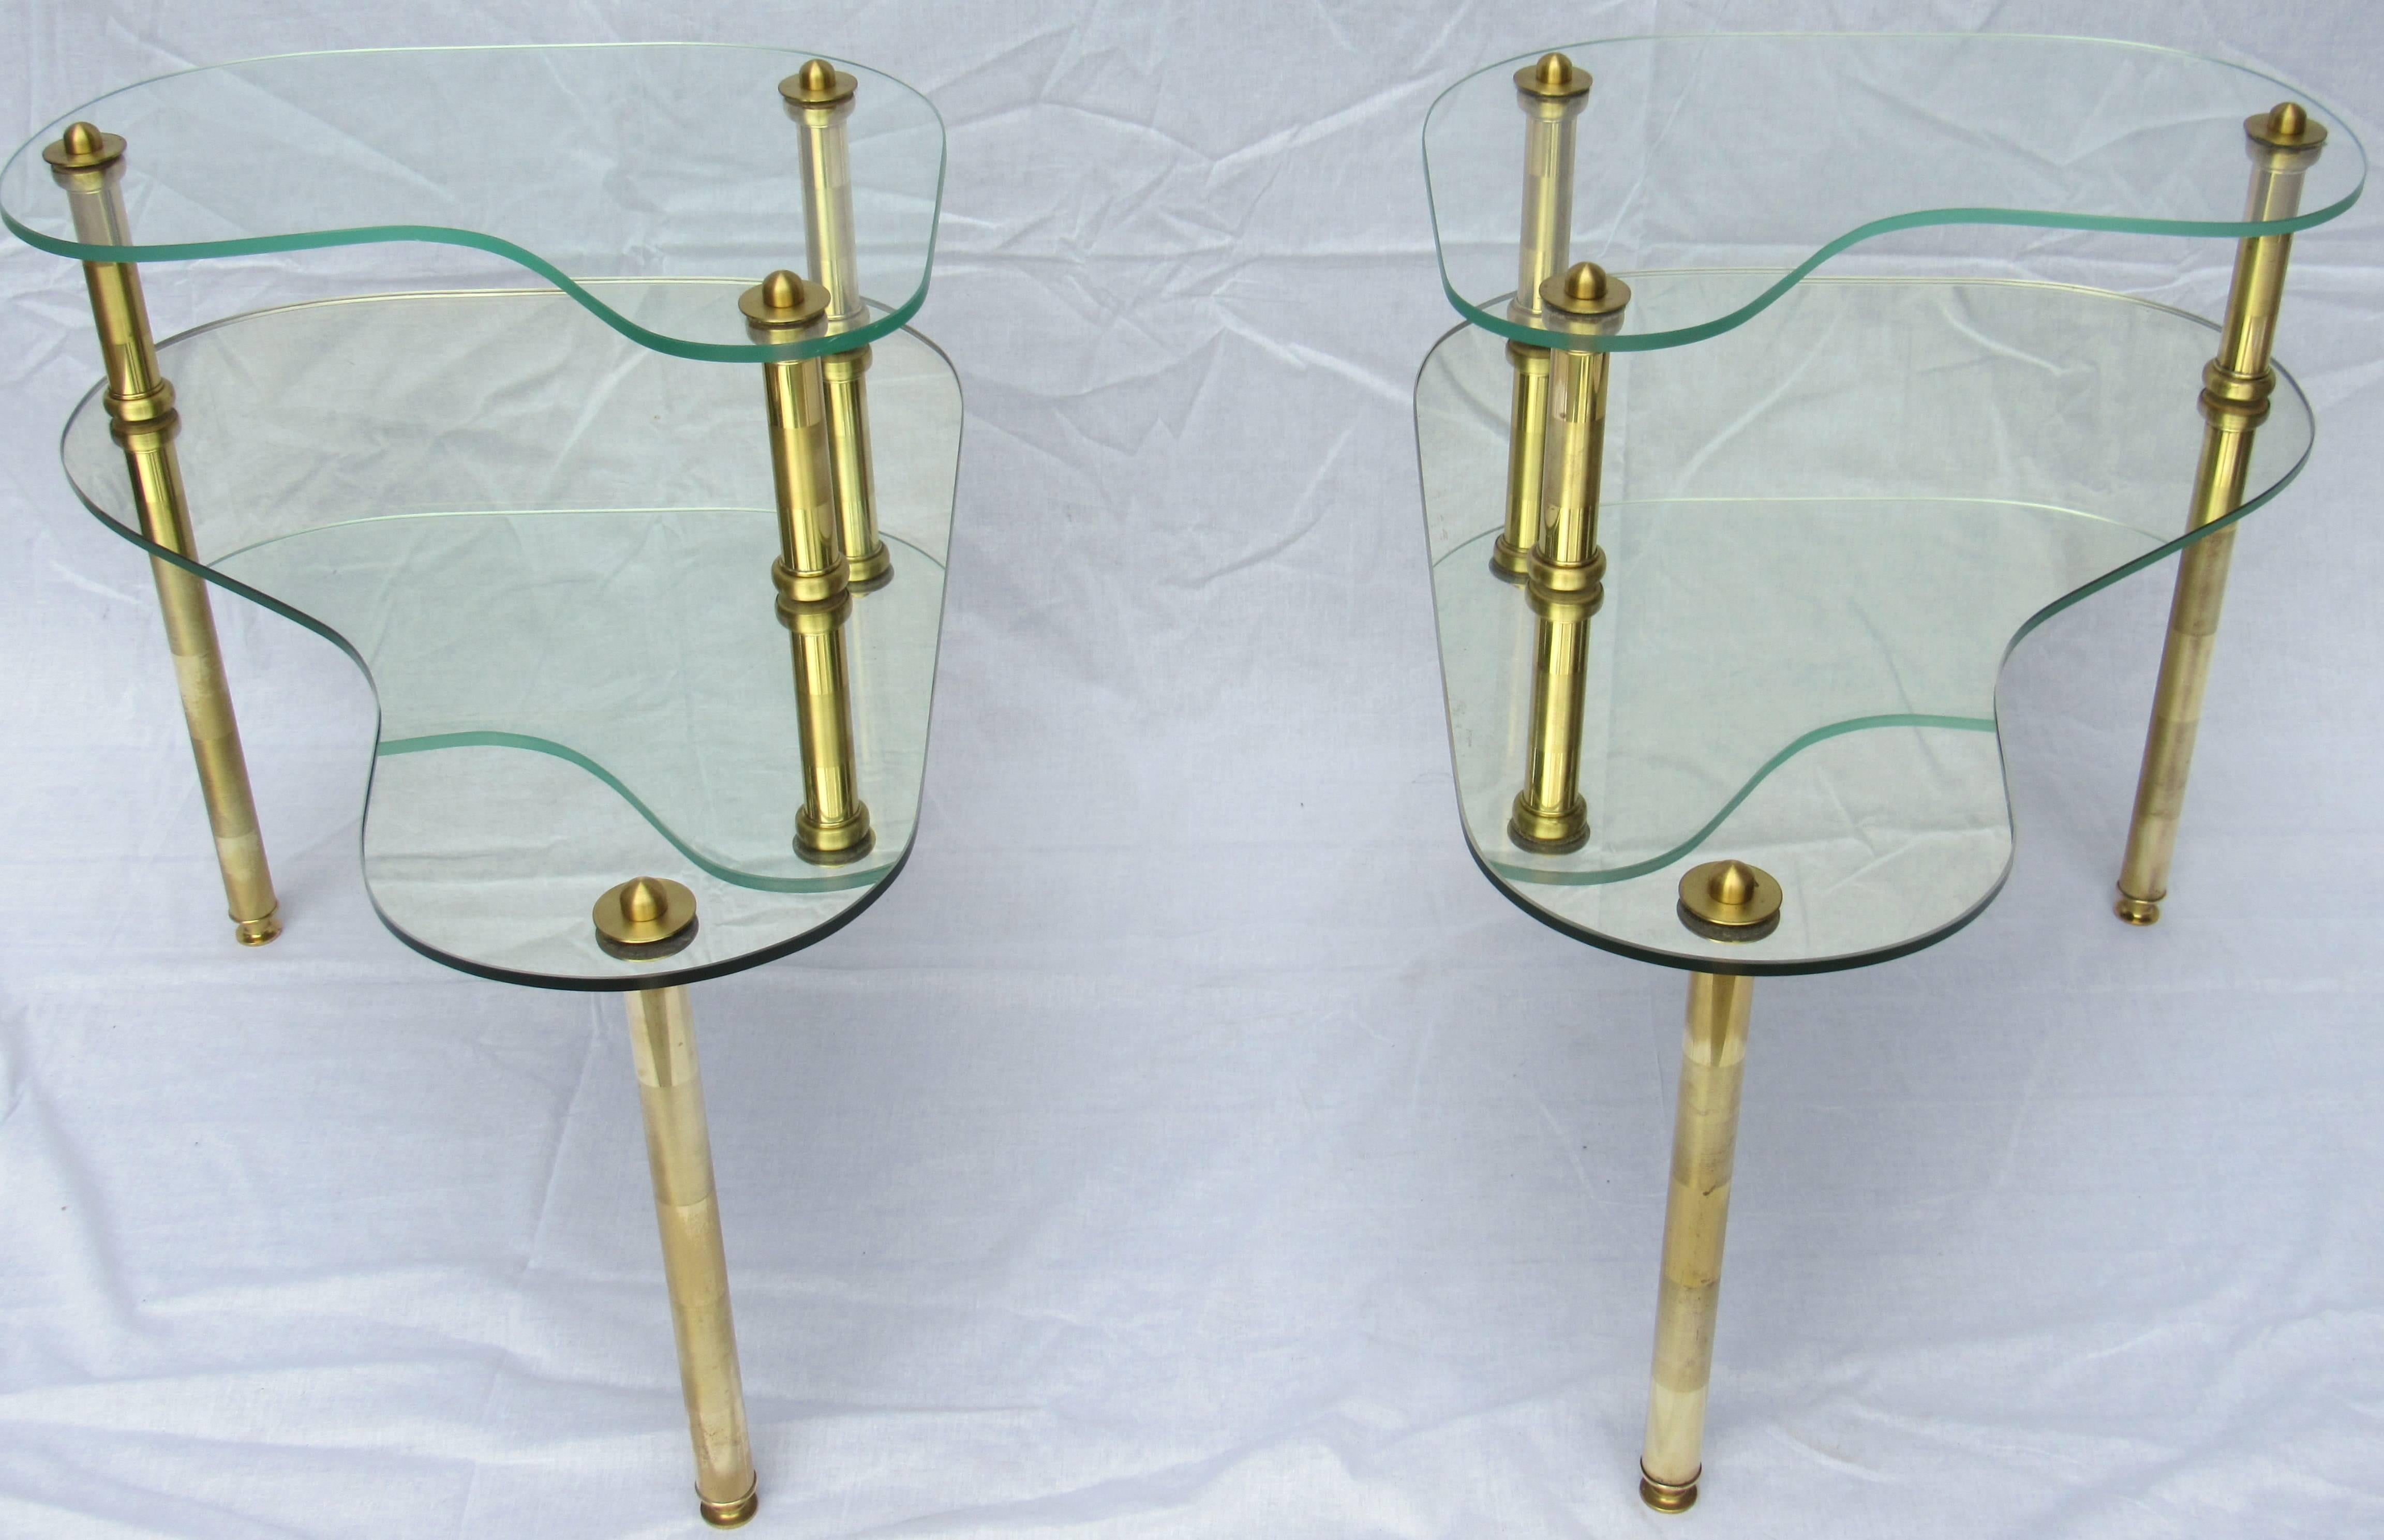 Semon Bache & Co. New York pair of chased brass matched end tables from New York City.
The tables are in excellent vintage condition with chased brass banding accents.